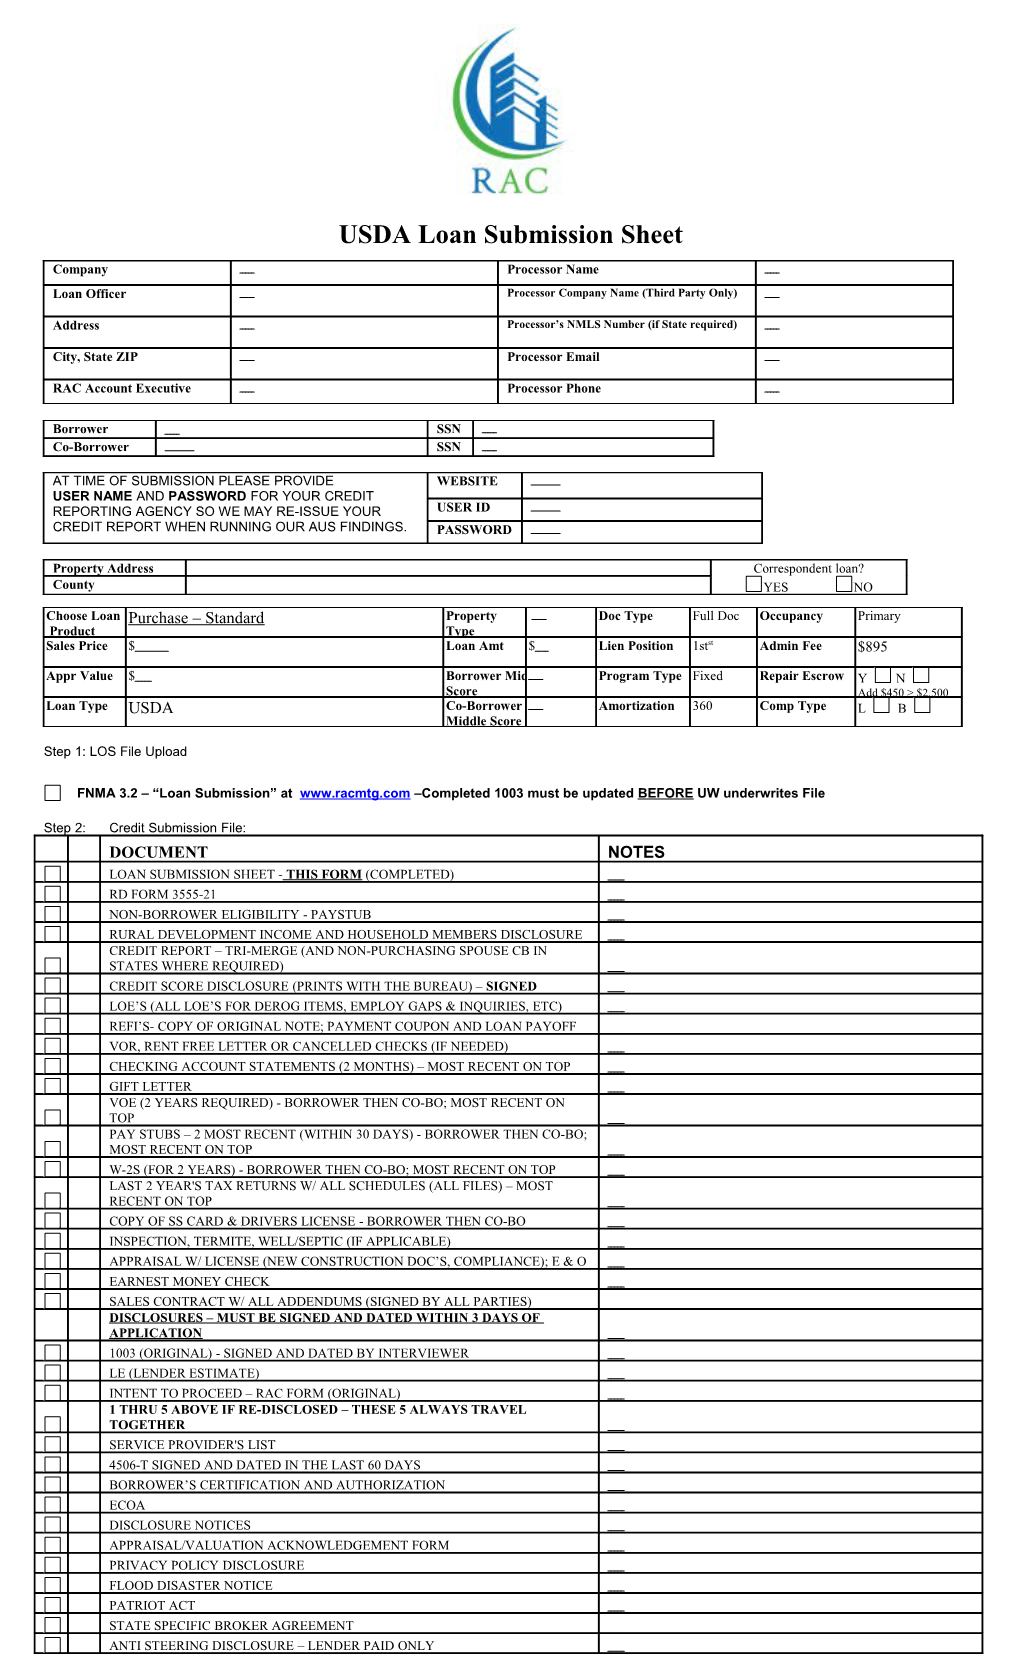 USDA Loan Submission Sheet